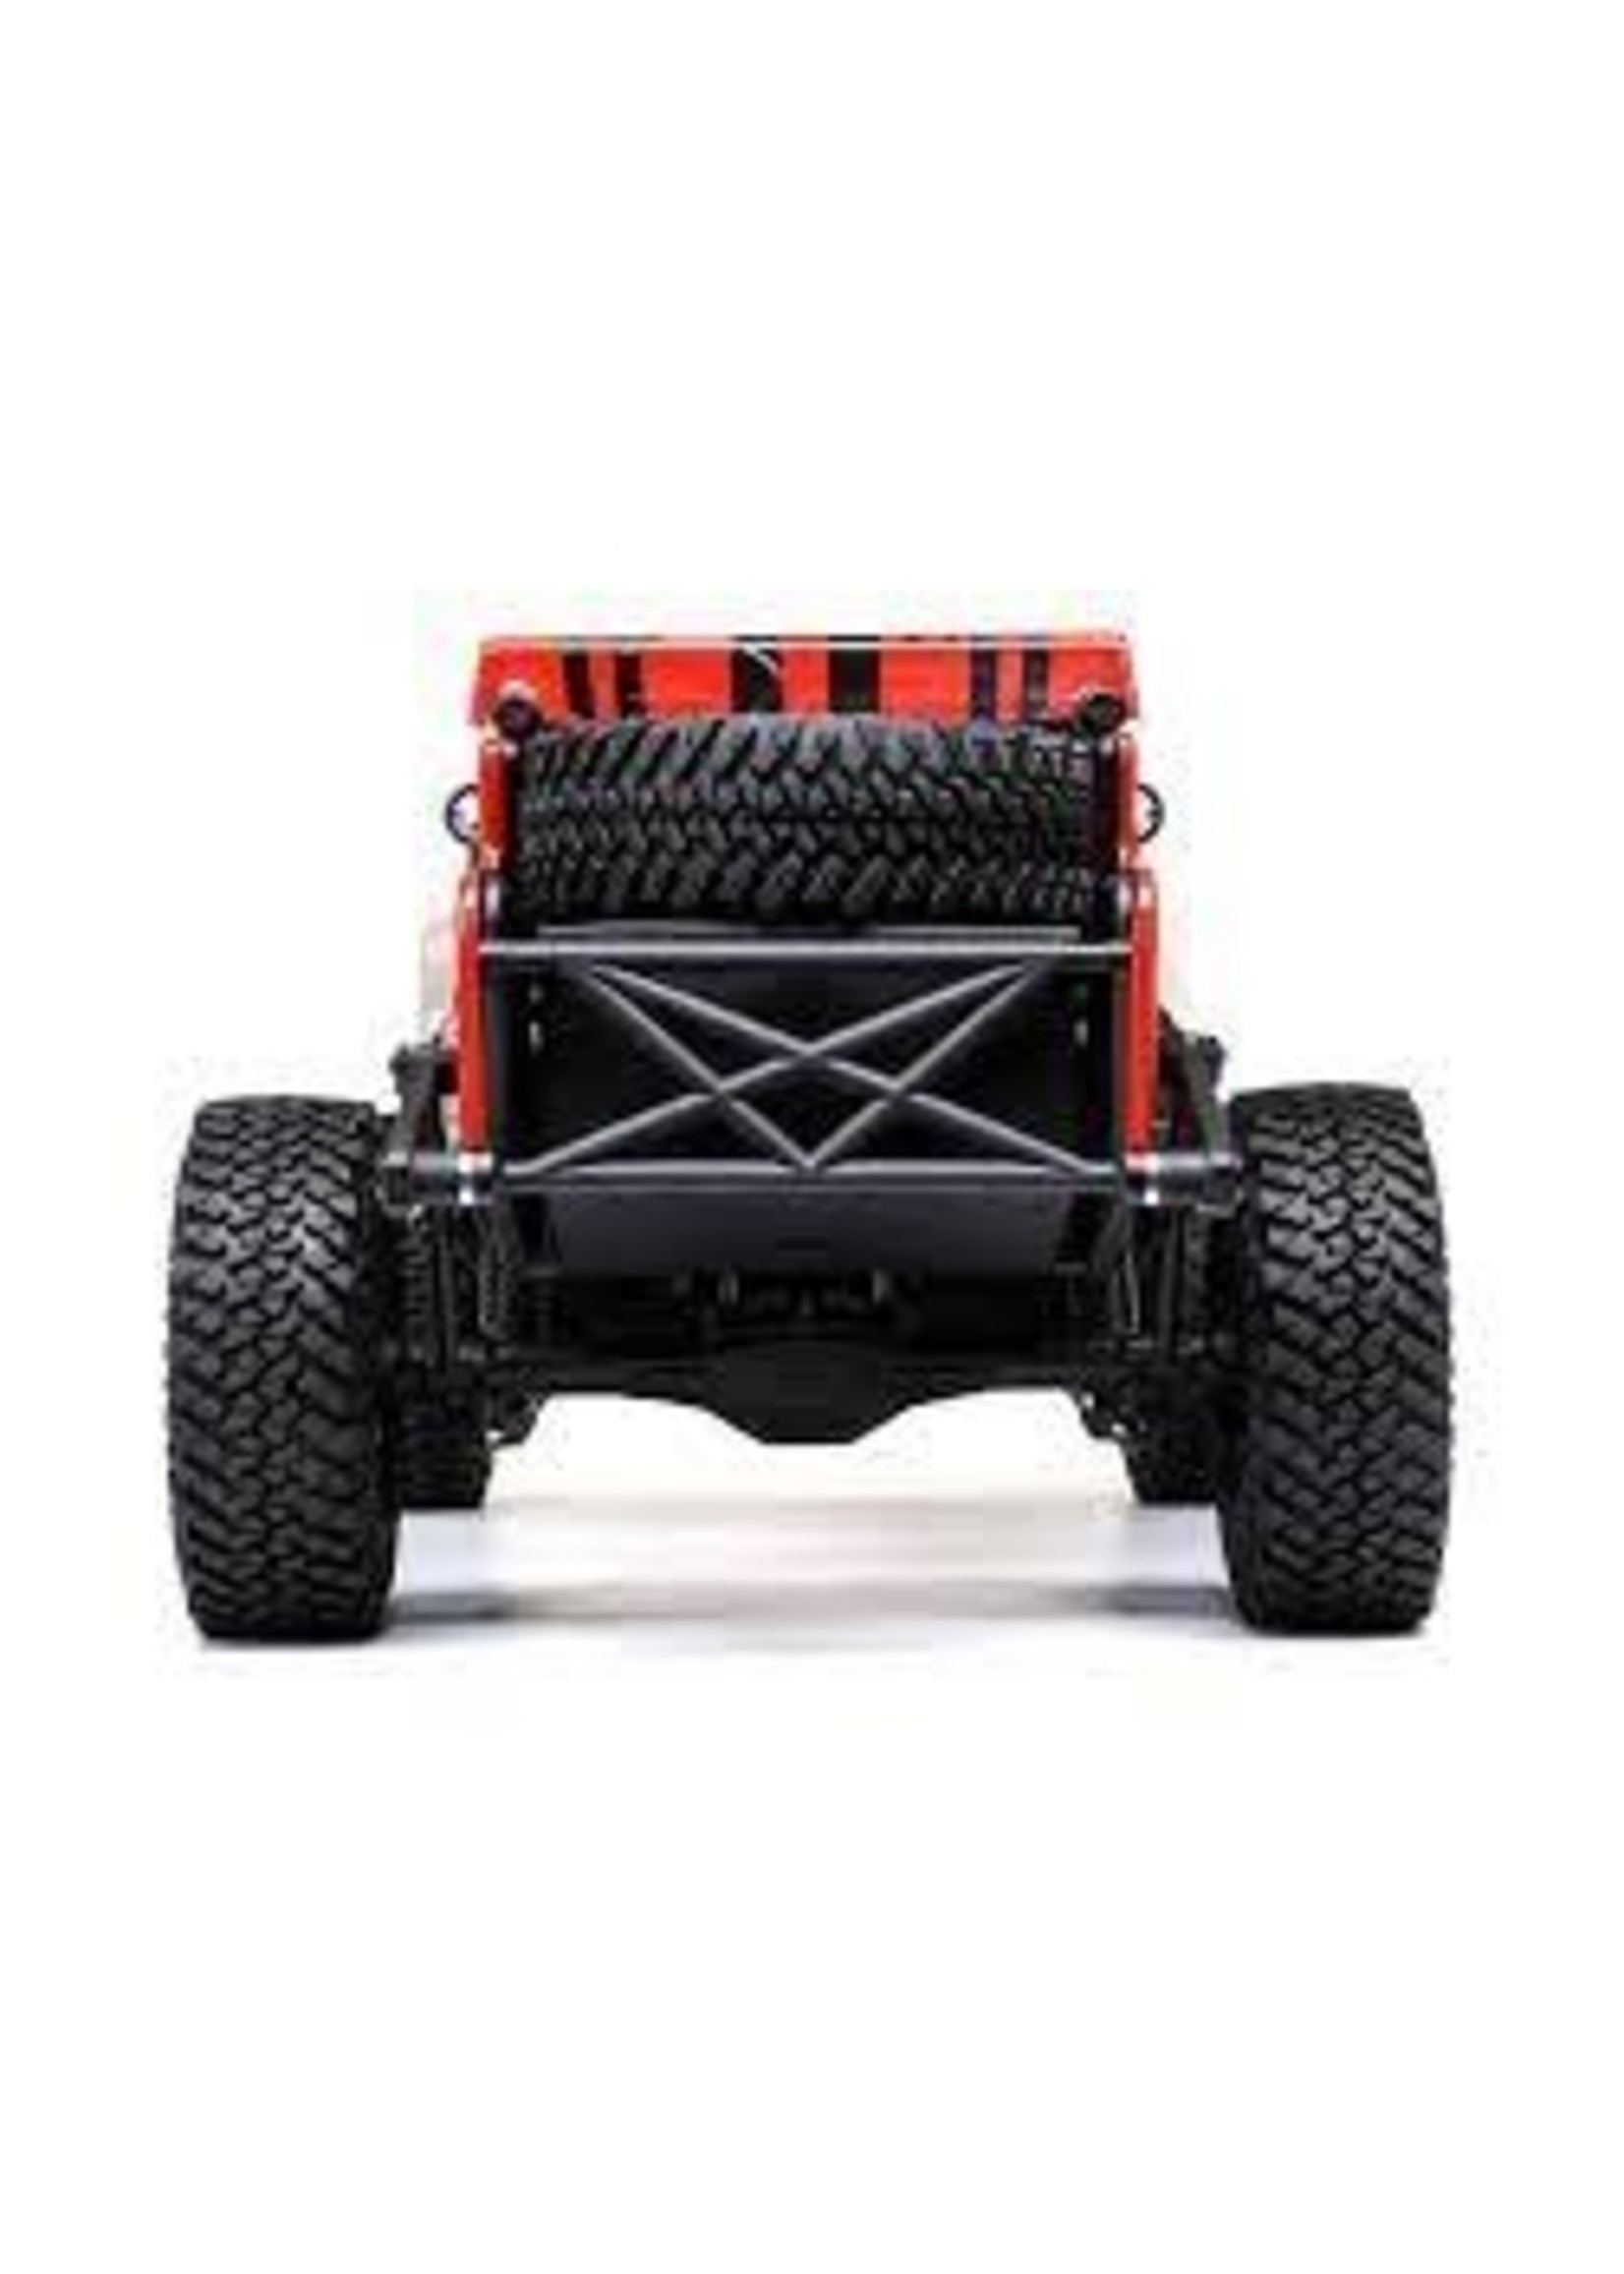 Losi LOS03030T1 Losi Hammer Rey U4 1/10 RTR 4WD Brushless Rock Racer Truck (Red) w/2.4GHz Radio, AVC & SMART